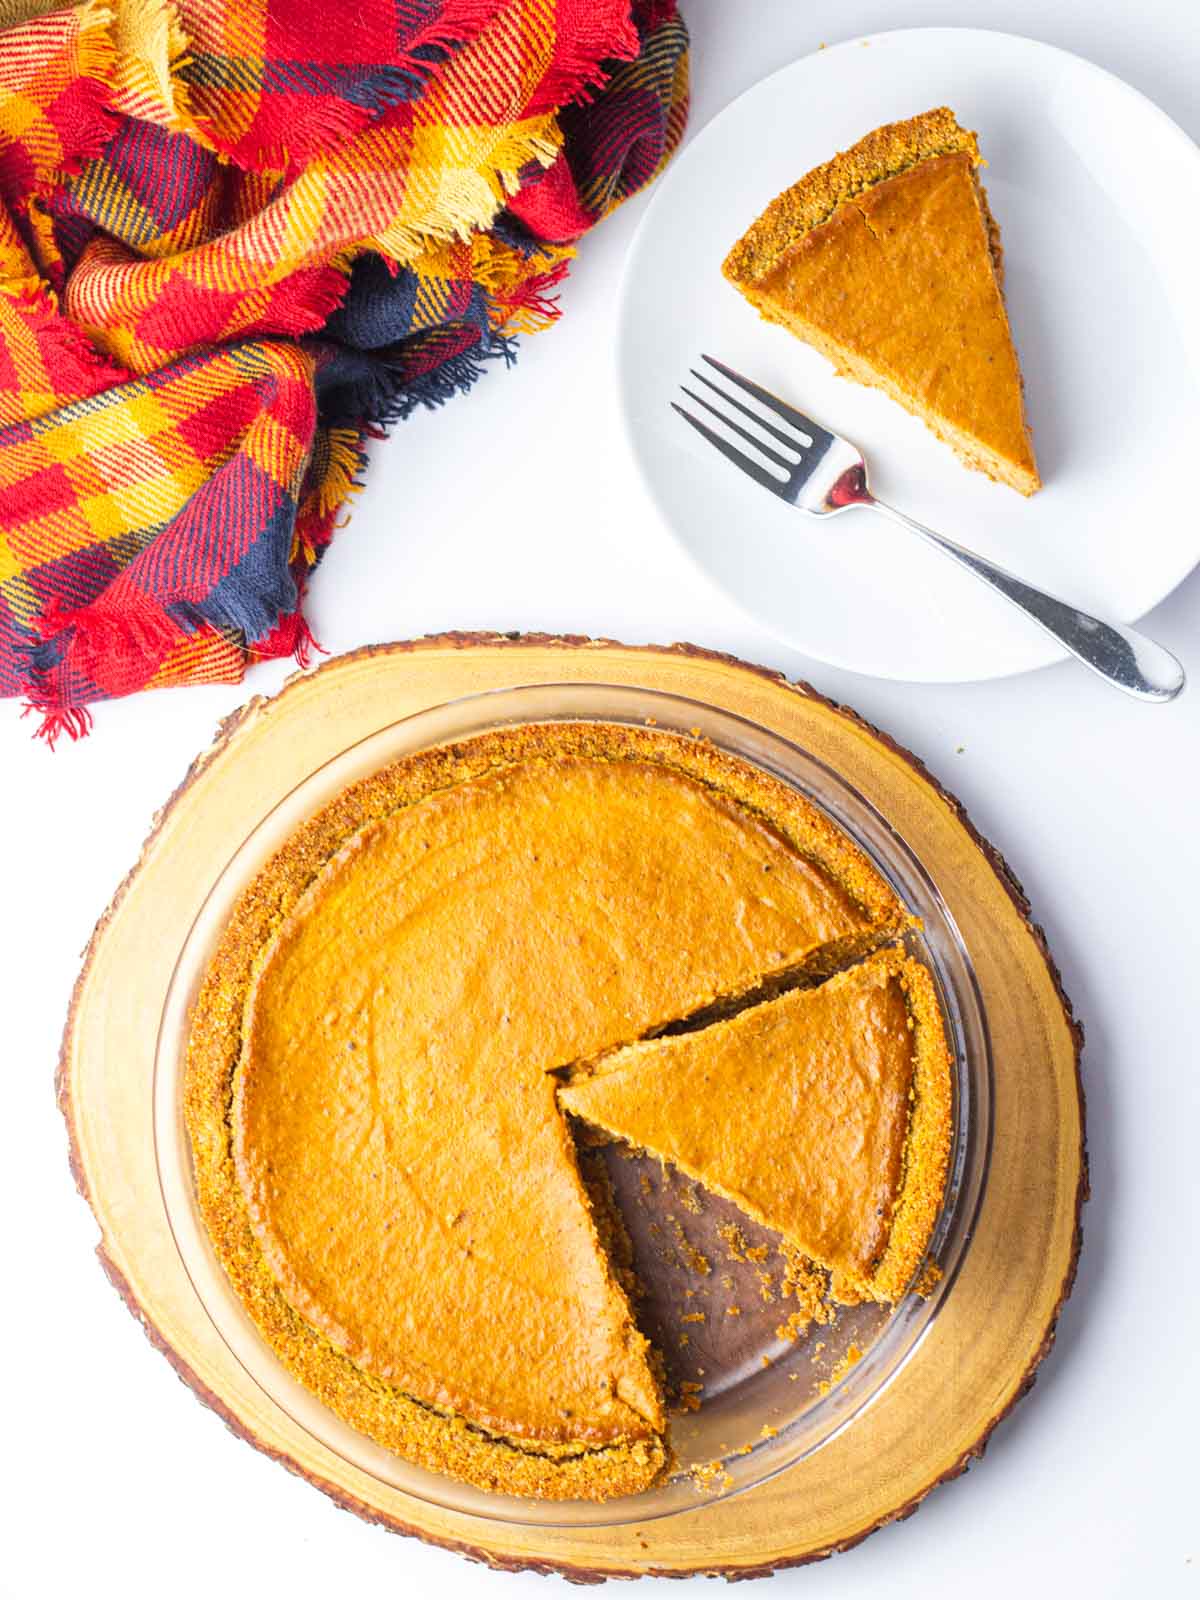 A pumpkin pie with one slice removed on a plate in the upper right corner and a second slice cut but not yet removed.